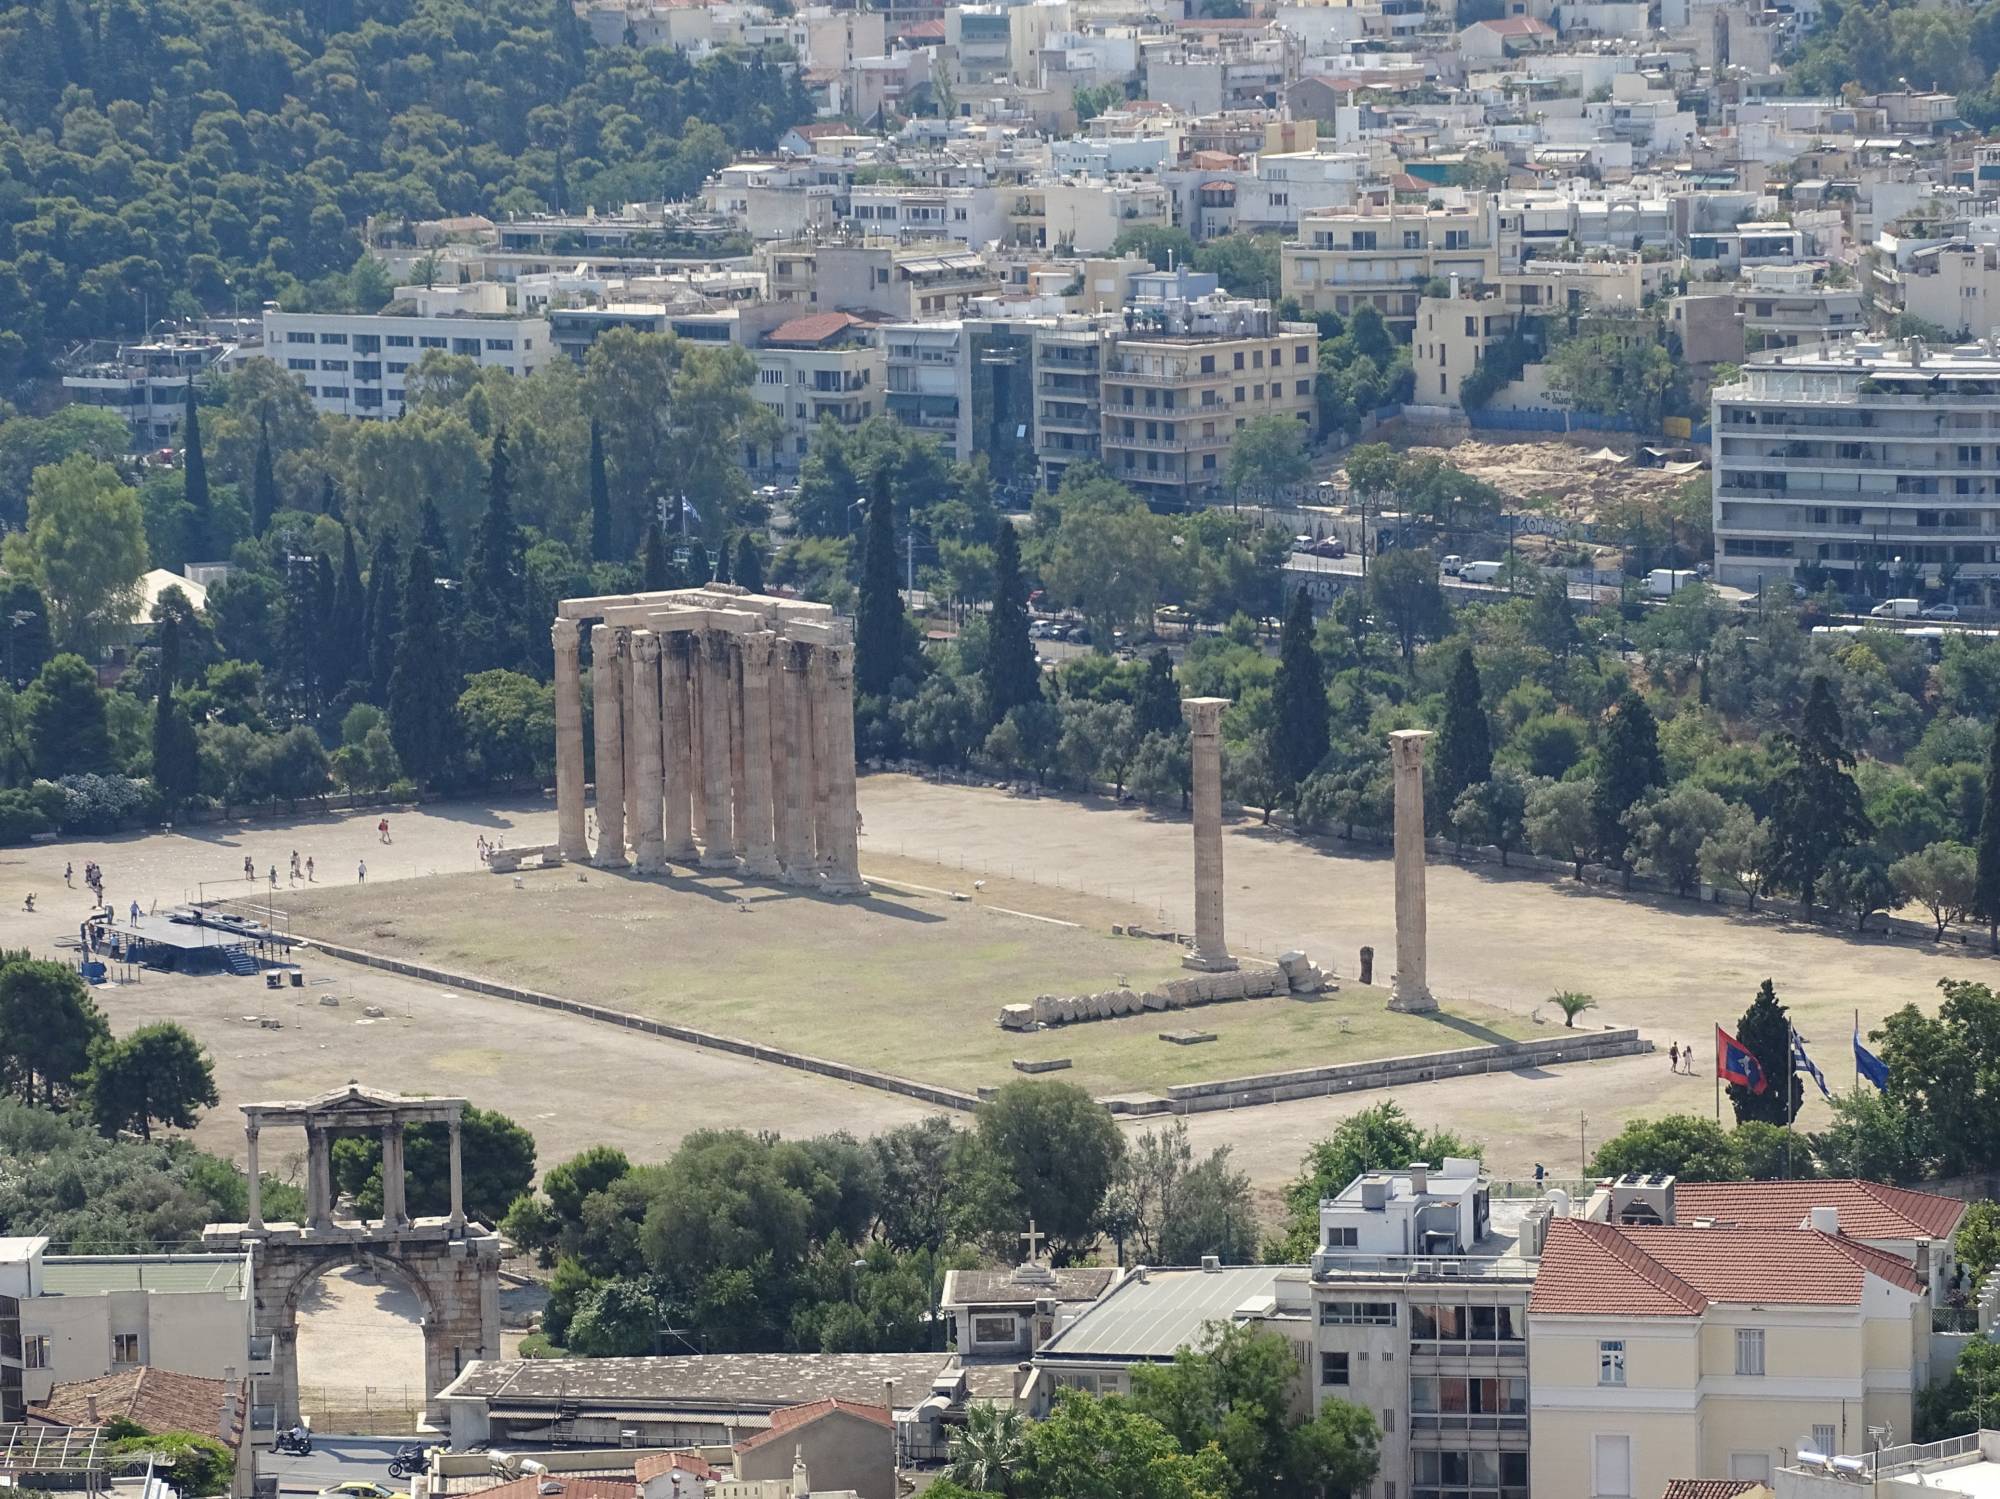 Athens - view from the Acropolis